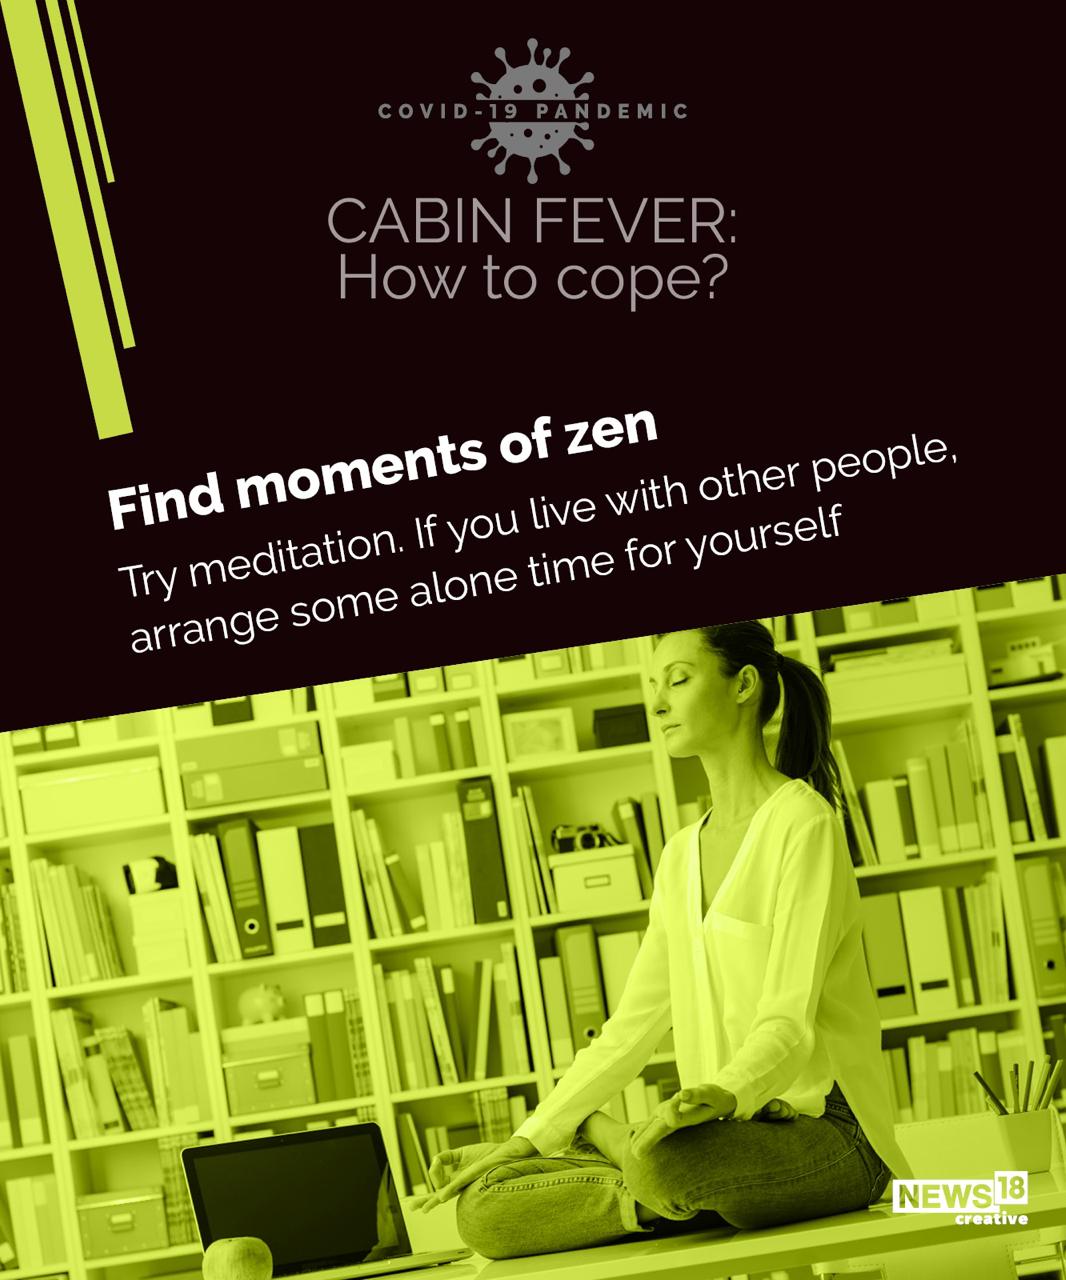 ways to cope with cabin fever during coronavirus